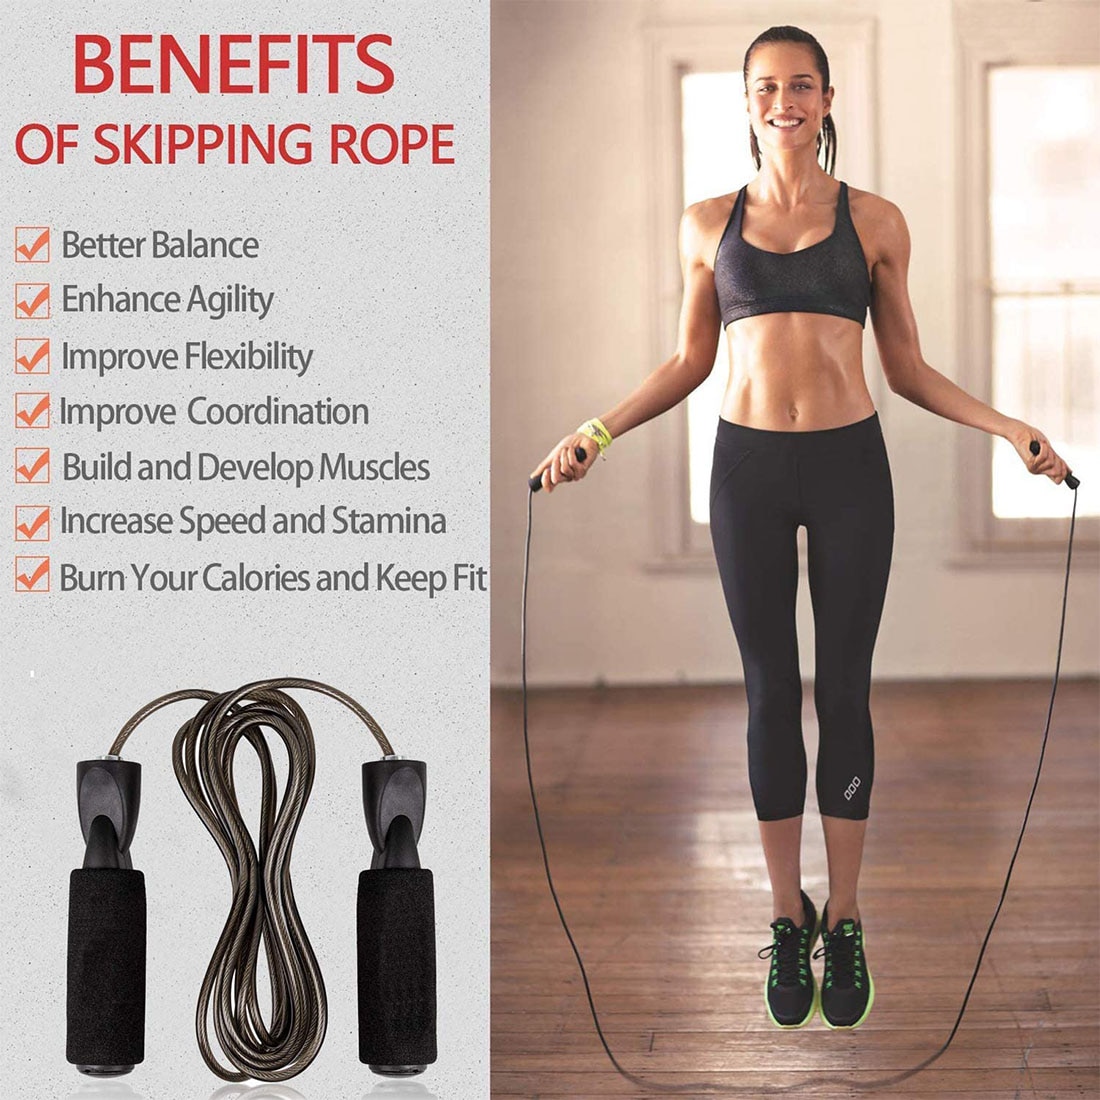 Steel Wire Jump Rope